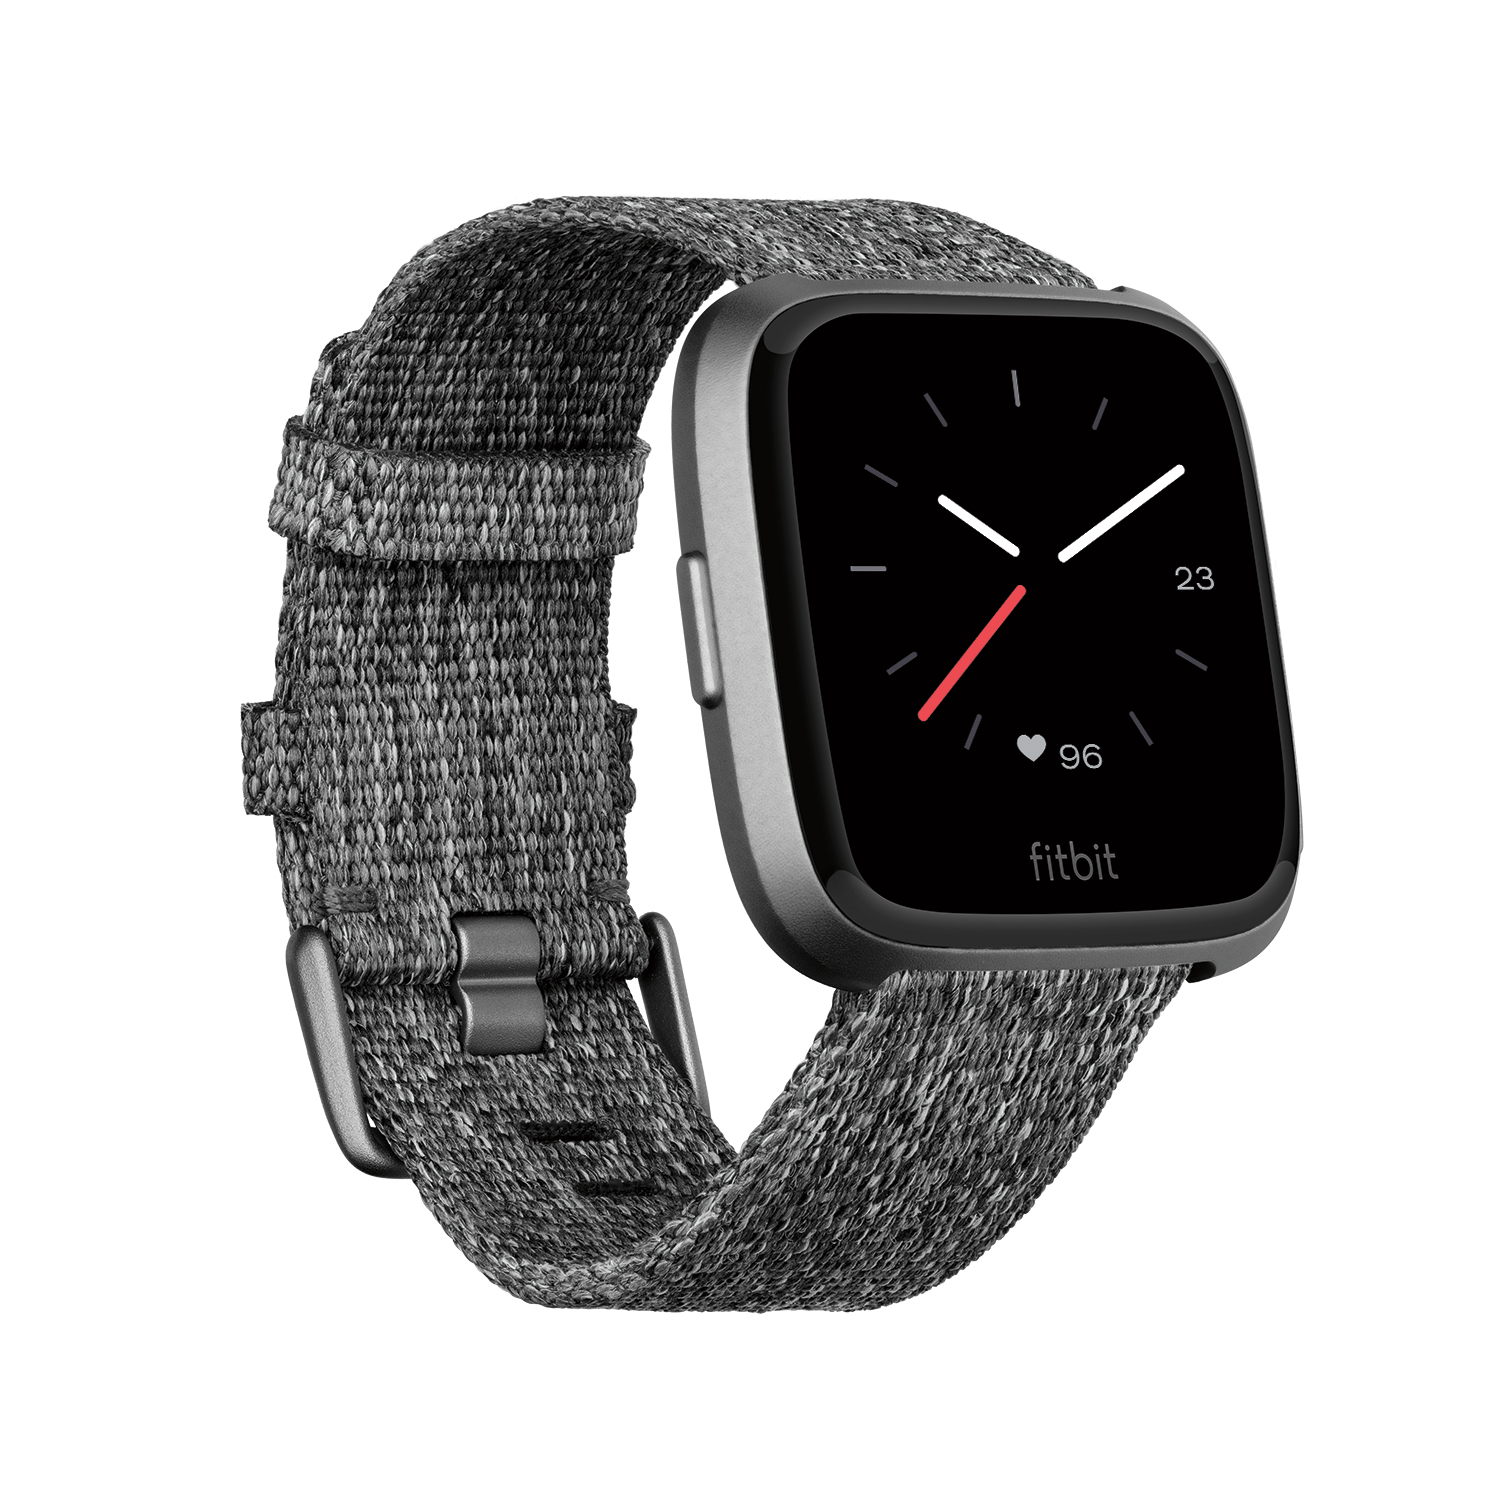 Fitbit Versa - Special Edition Smart Watch - image 1 of 6